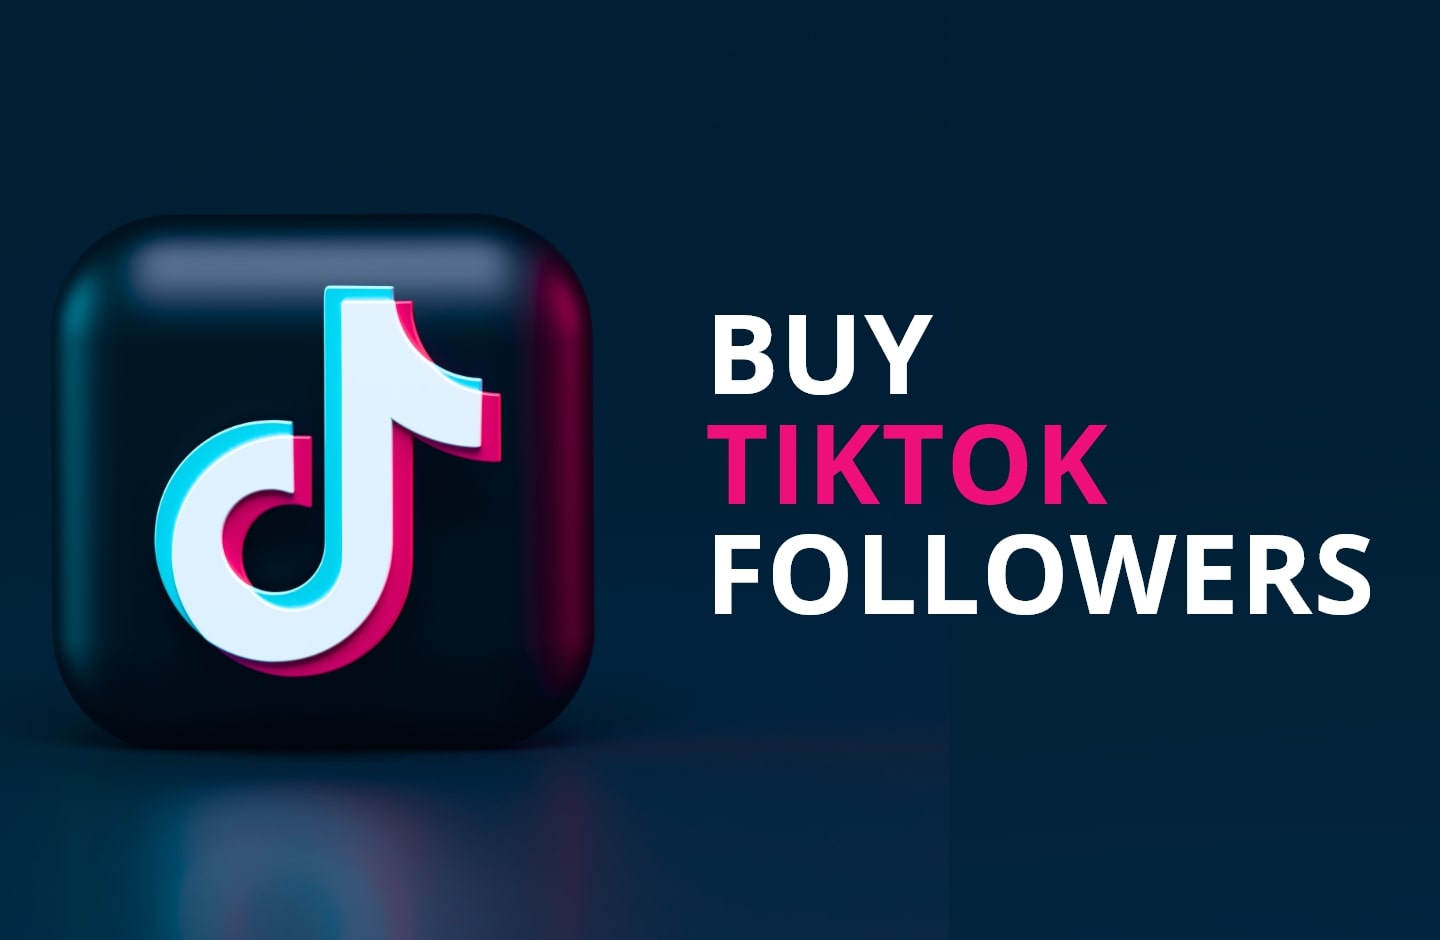 Buy tiktok views paypal- Here Are Few Tips